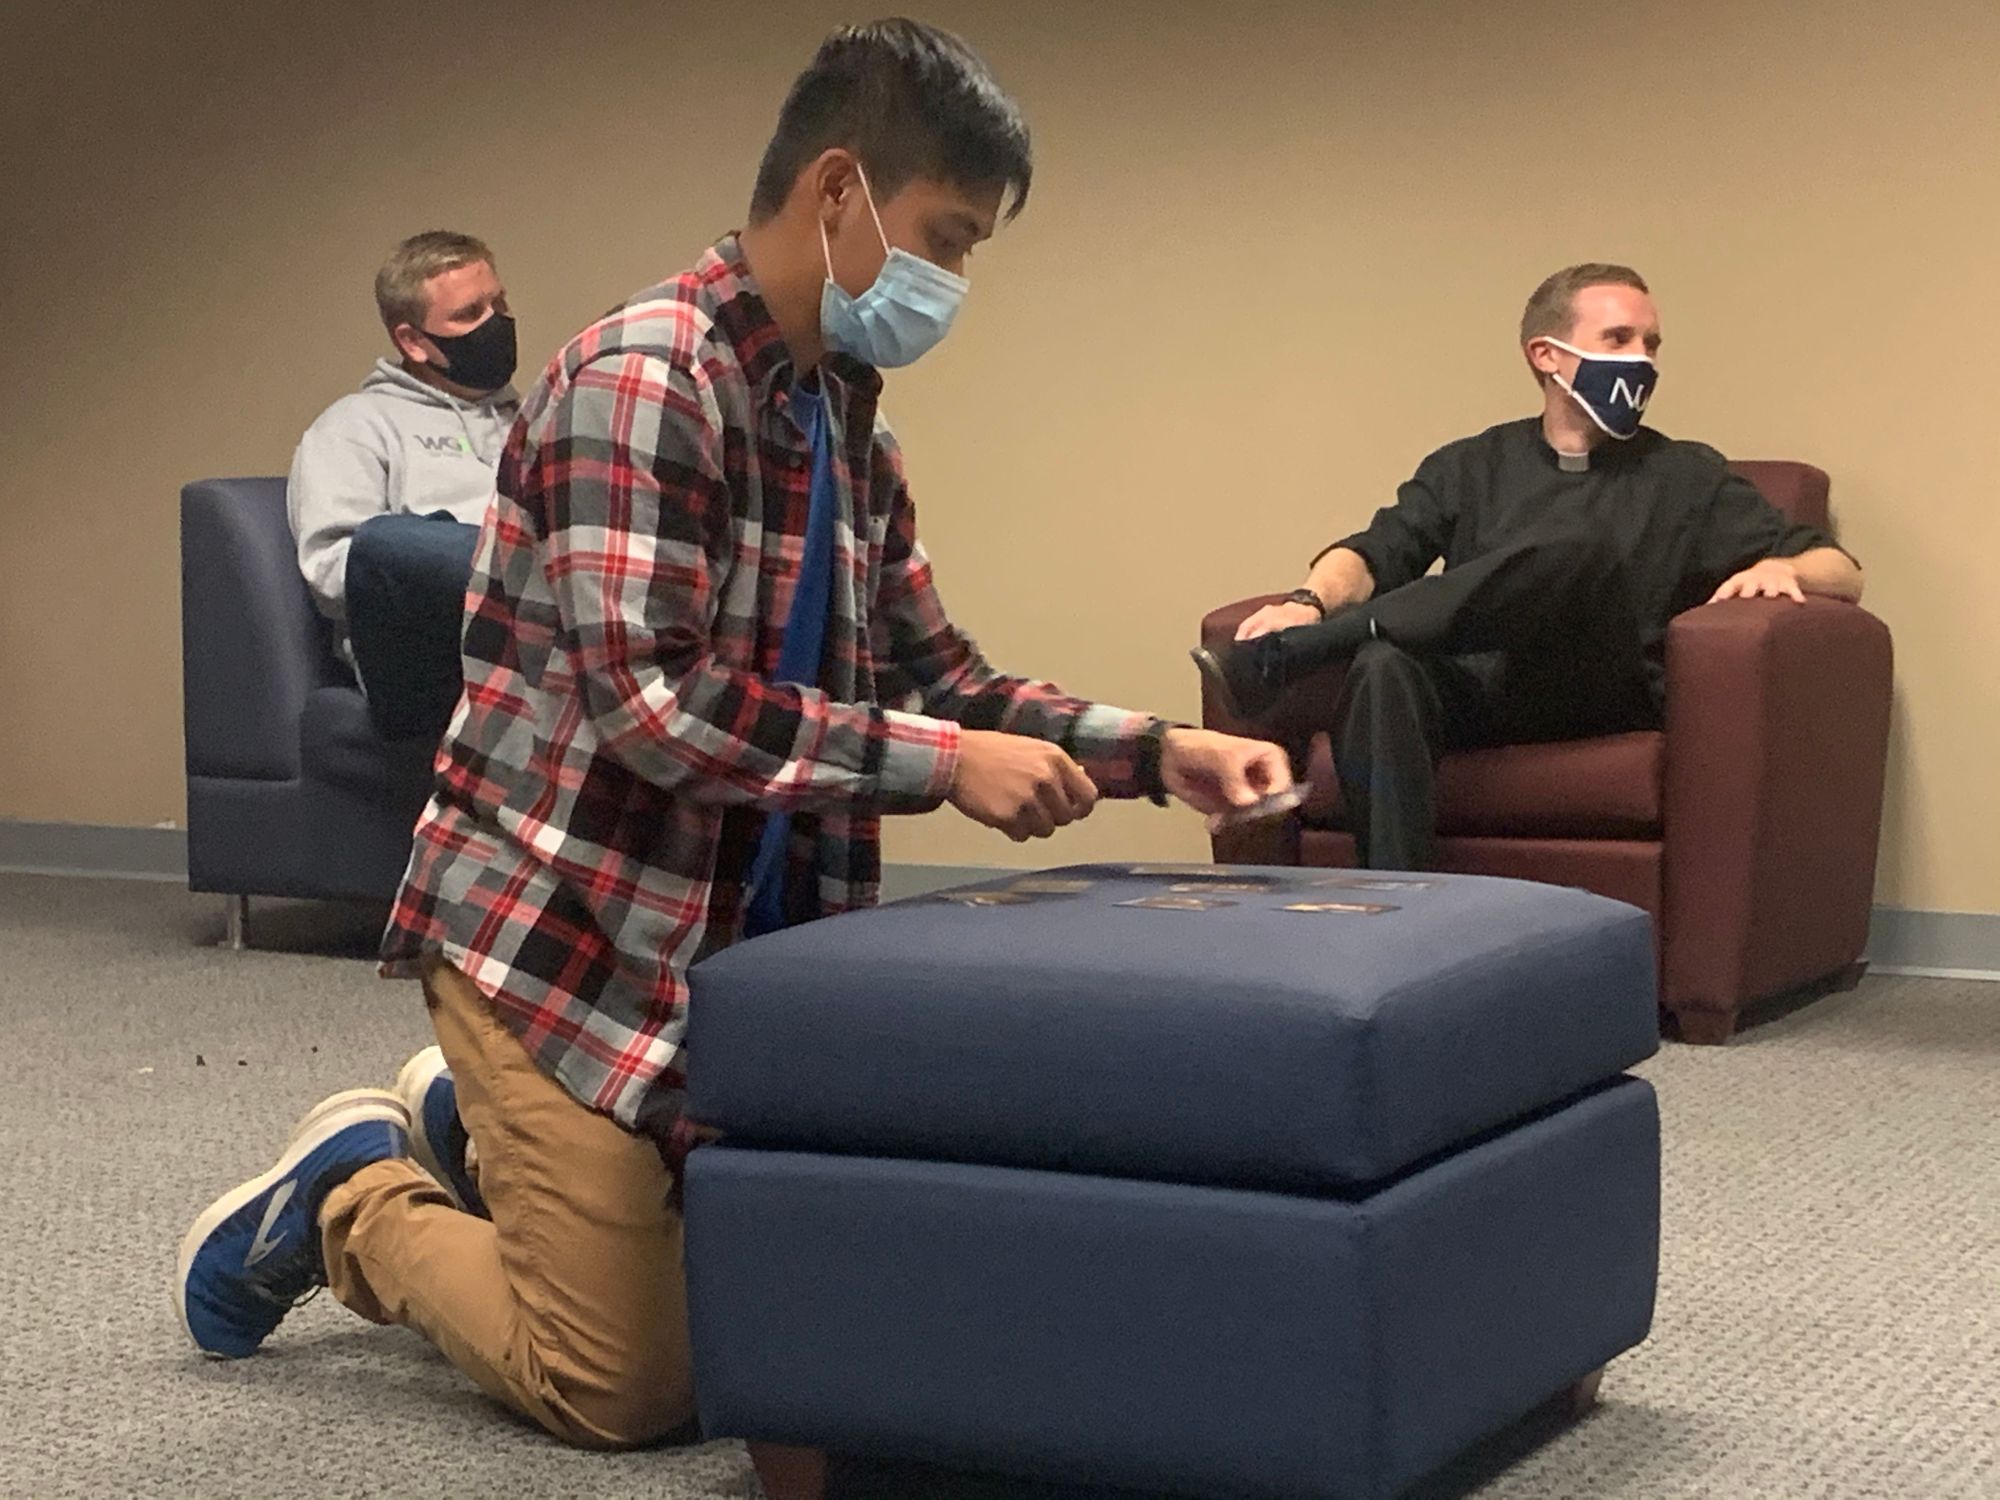 Campus Ministry gets a board and games